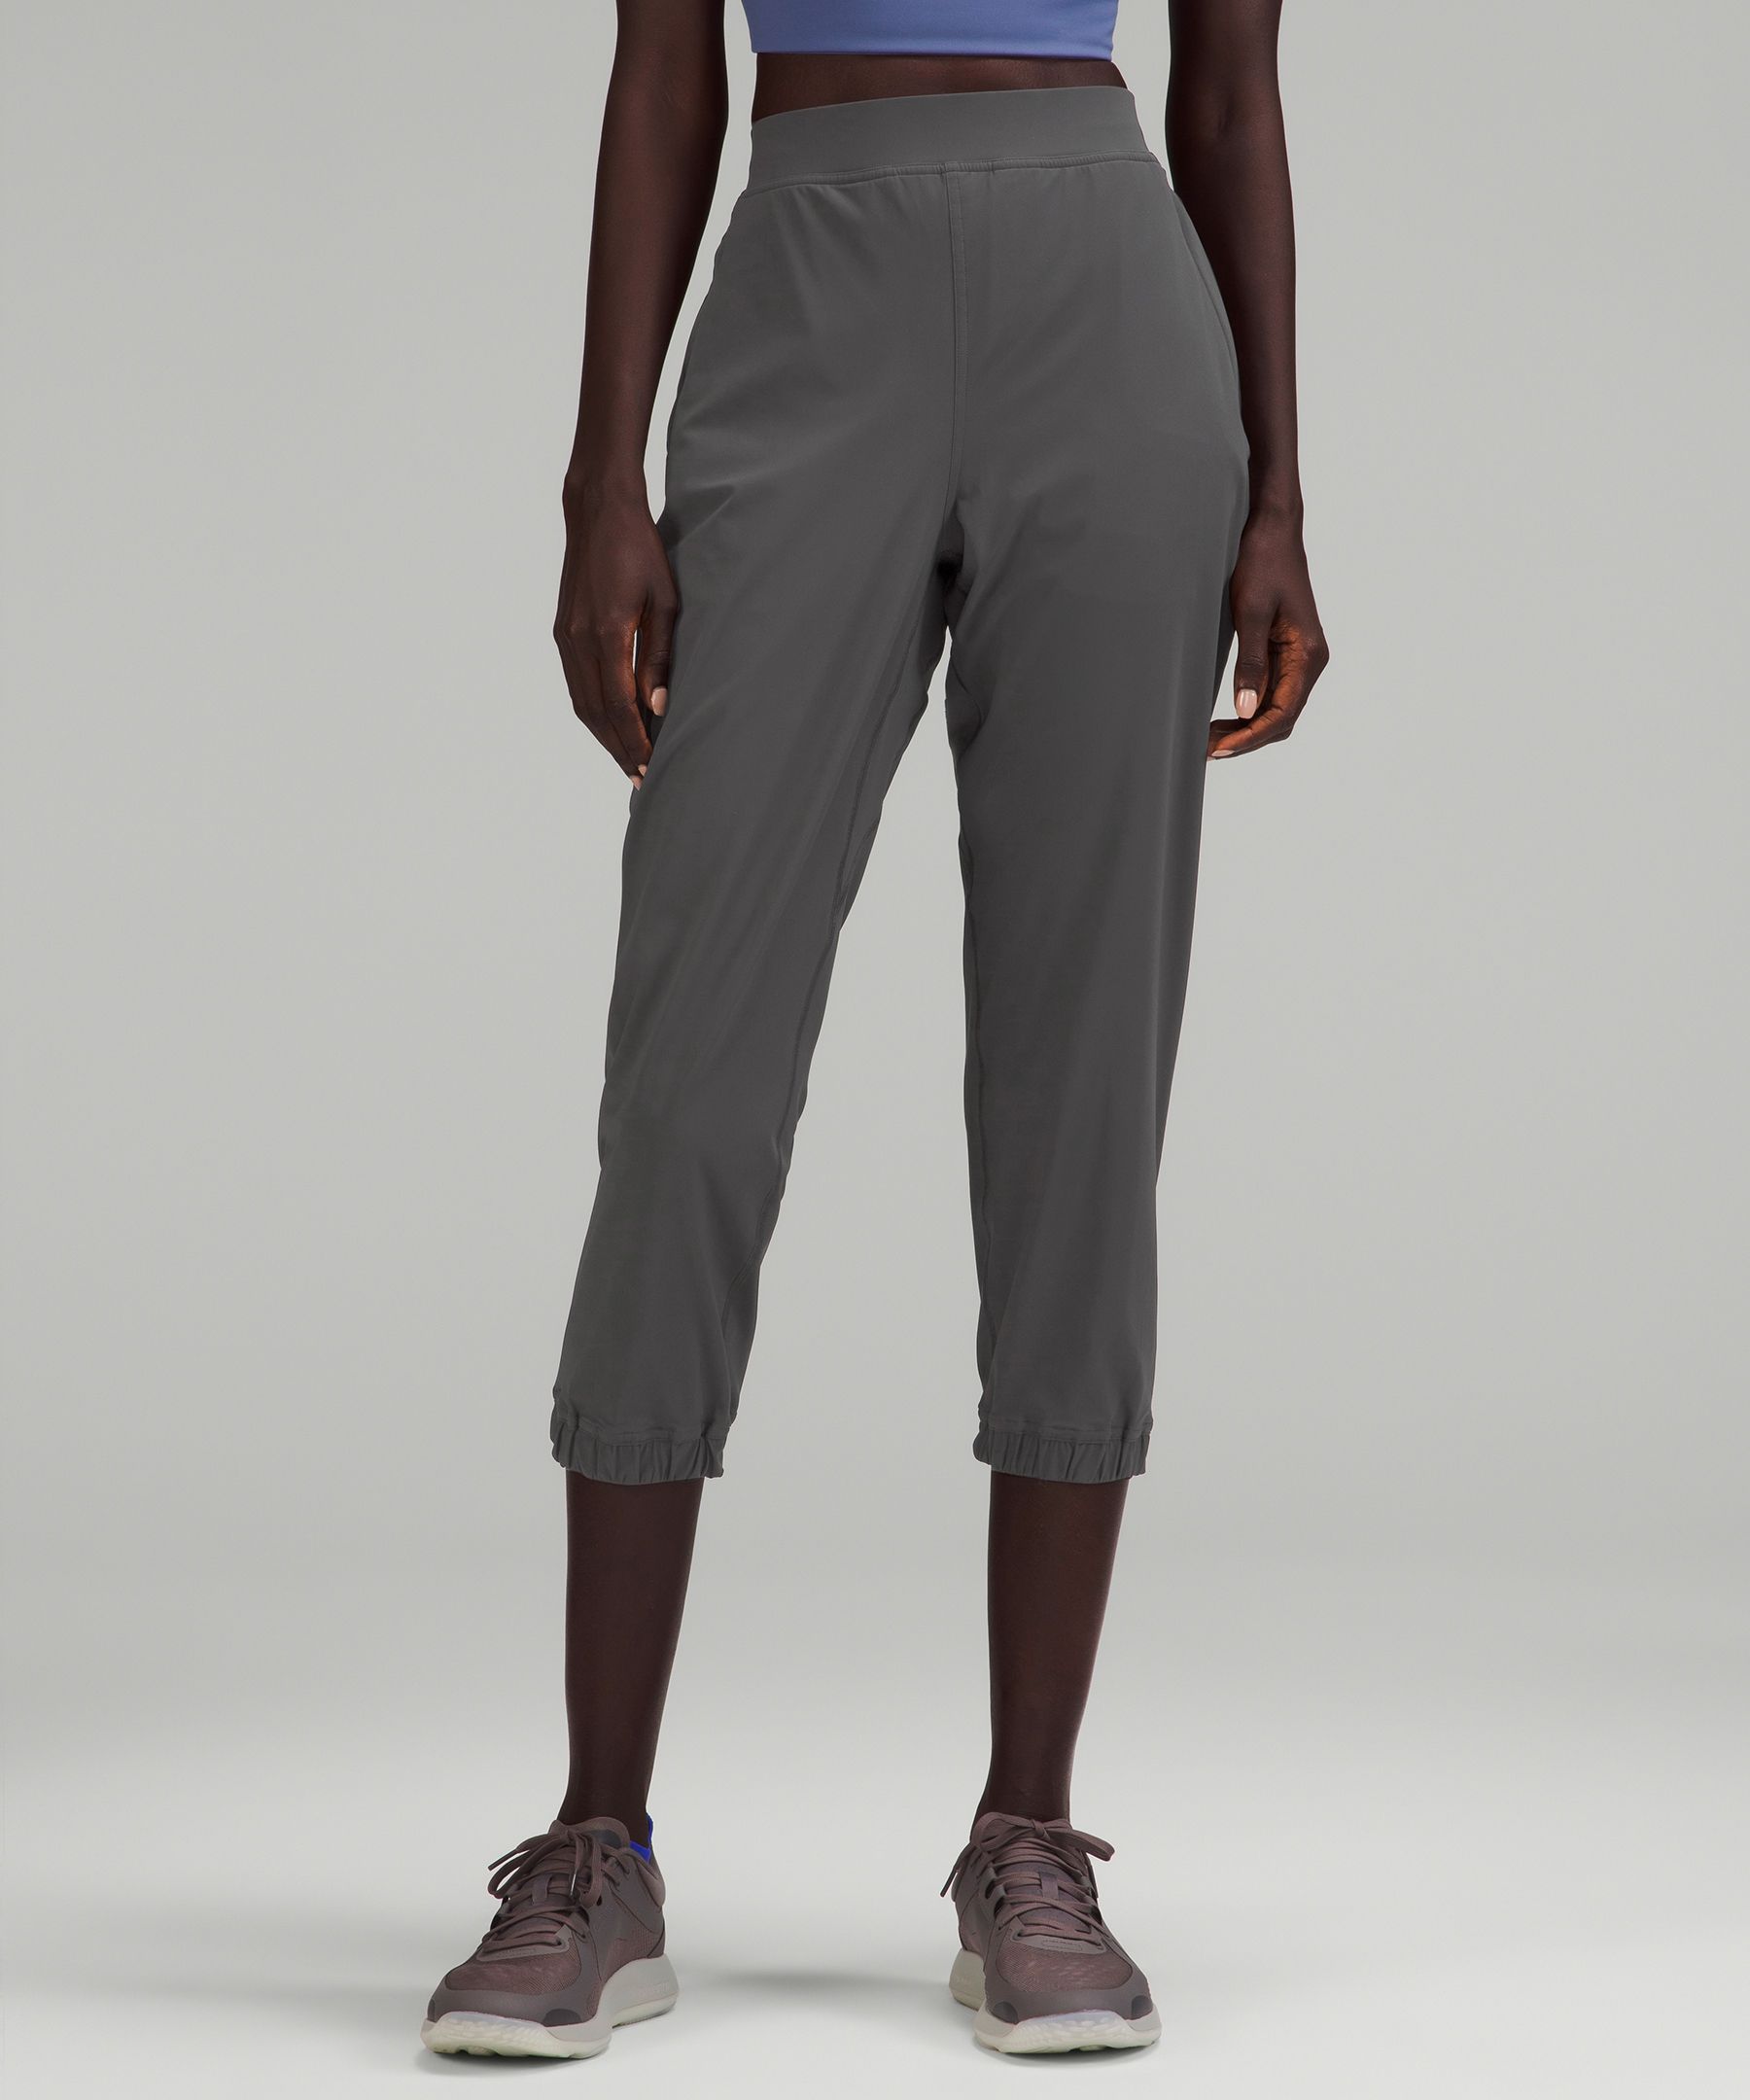 Lululemon Adapted State High-Rise Cropped Jogger - Medium Forest